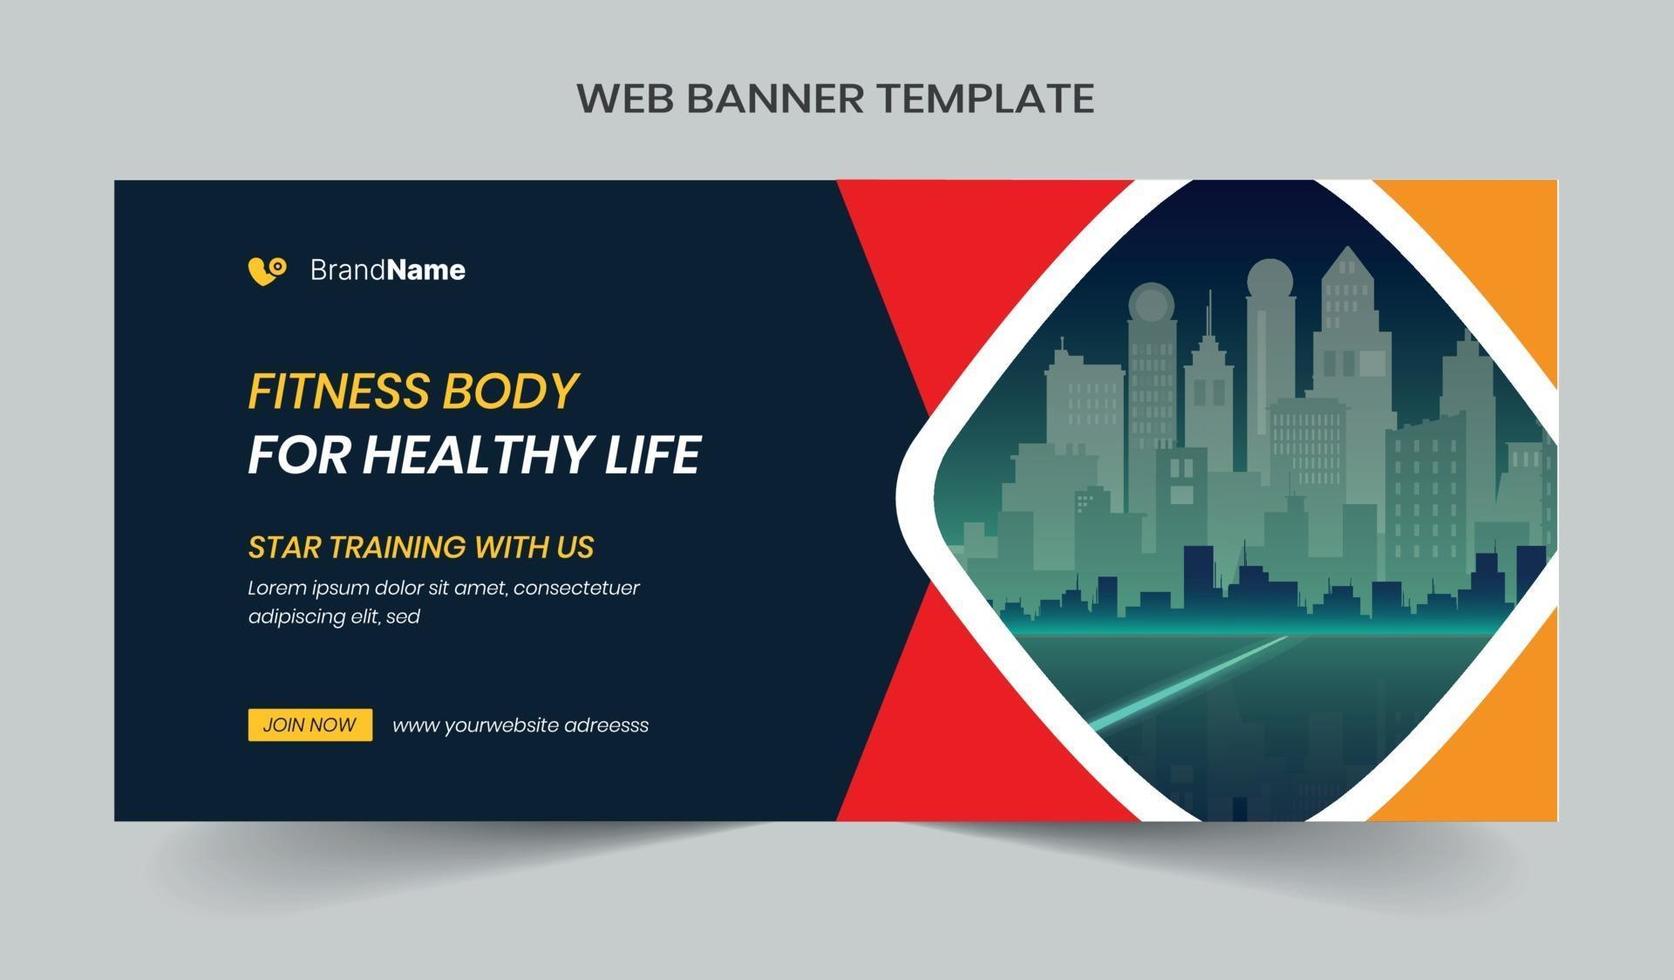 Social media post and web banner template design. Fully editable vector